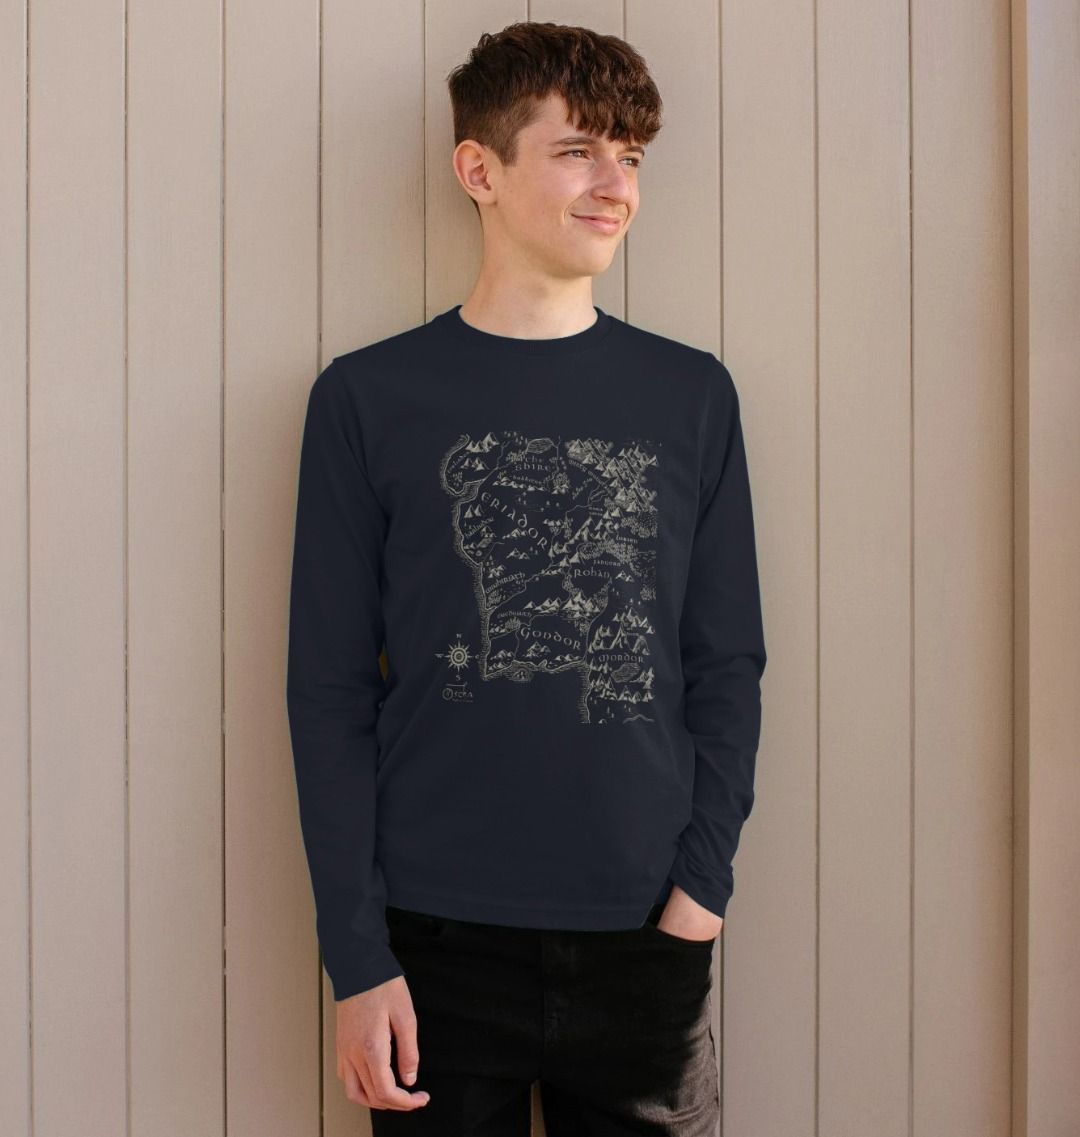 Realm of MIDDLE-EARTH™ Kids Long Sleeved T-shirt